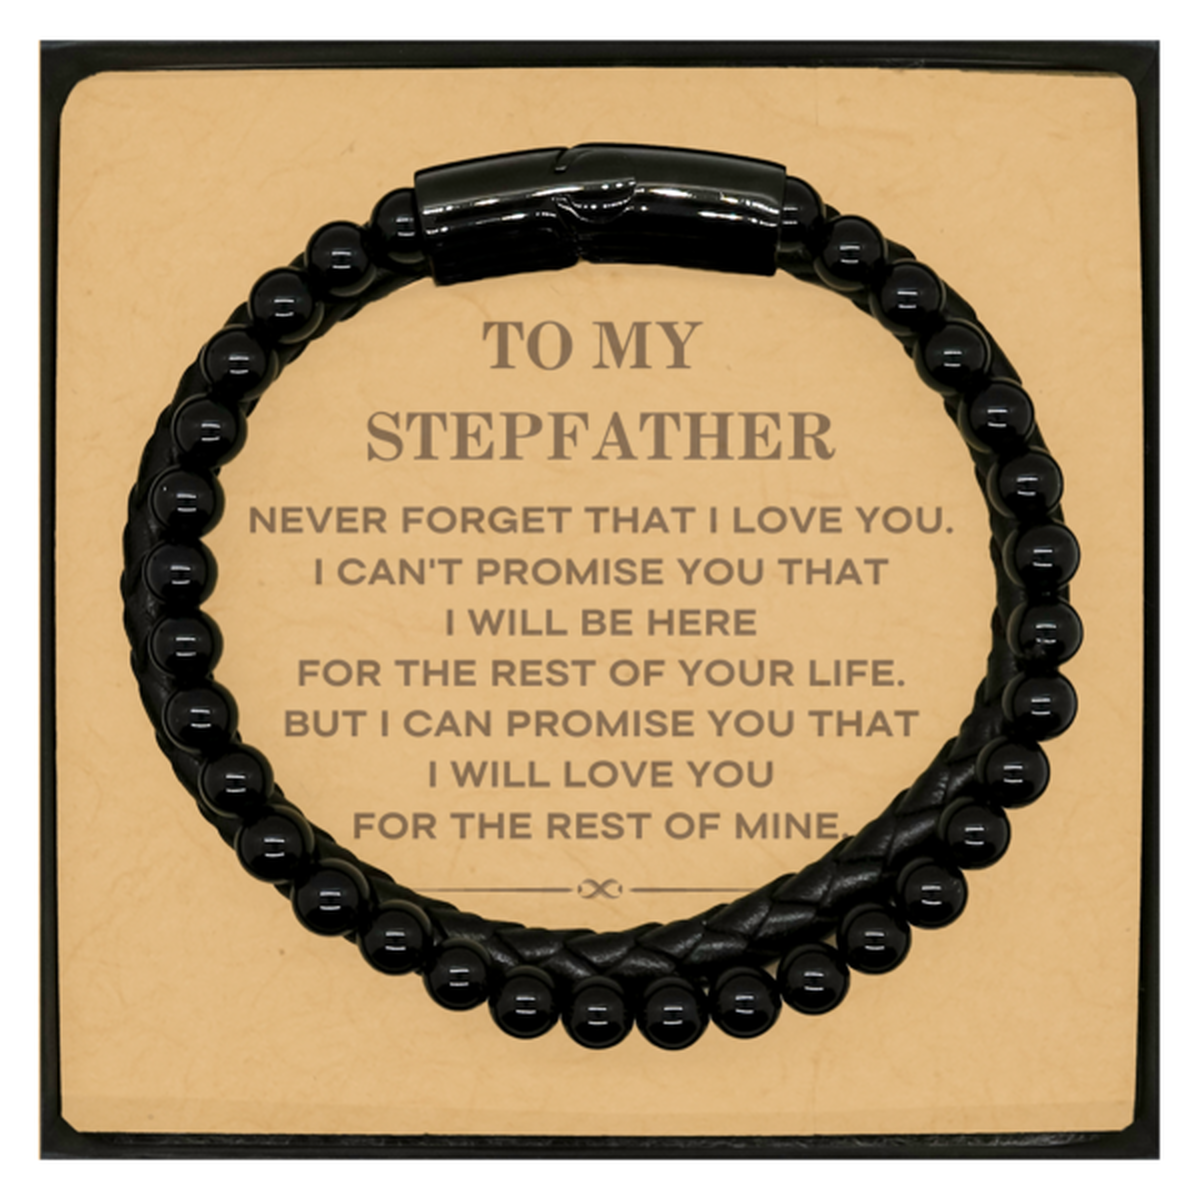 To My Stepfather Gifts, I will love you for the rest of mine, Love Stepfather Bracelet, Birthday Christmas Unique Stone Leather Bracelets For Stepfather